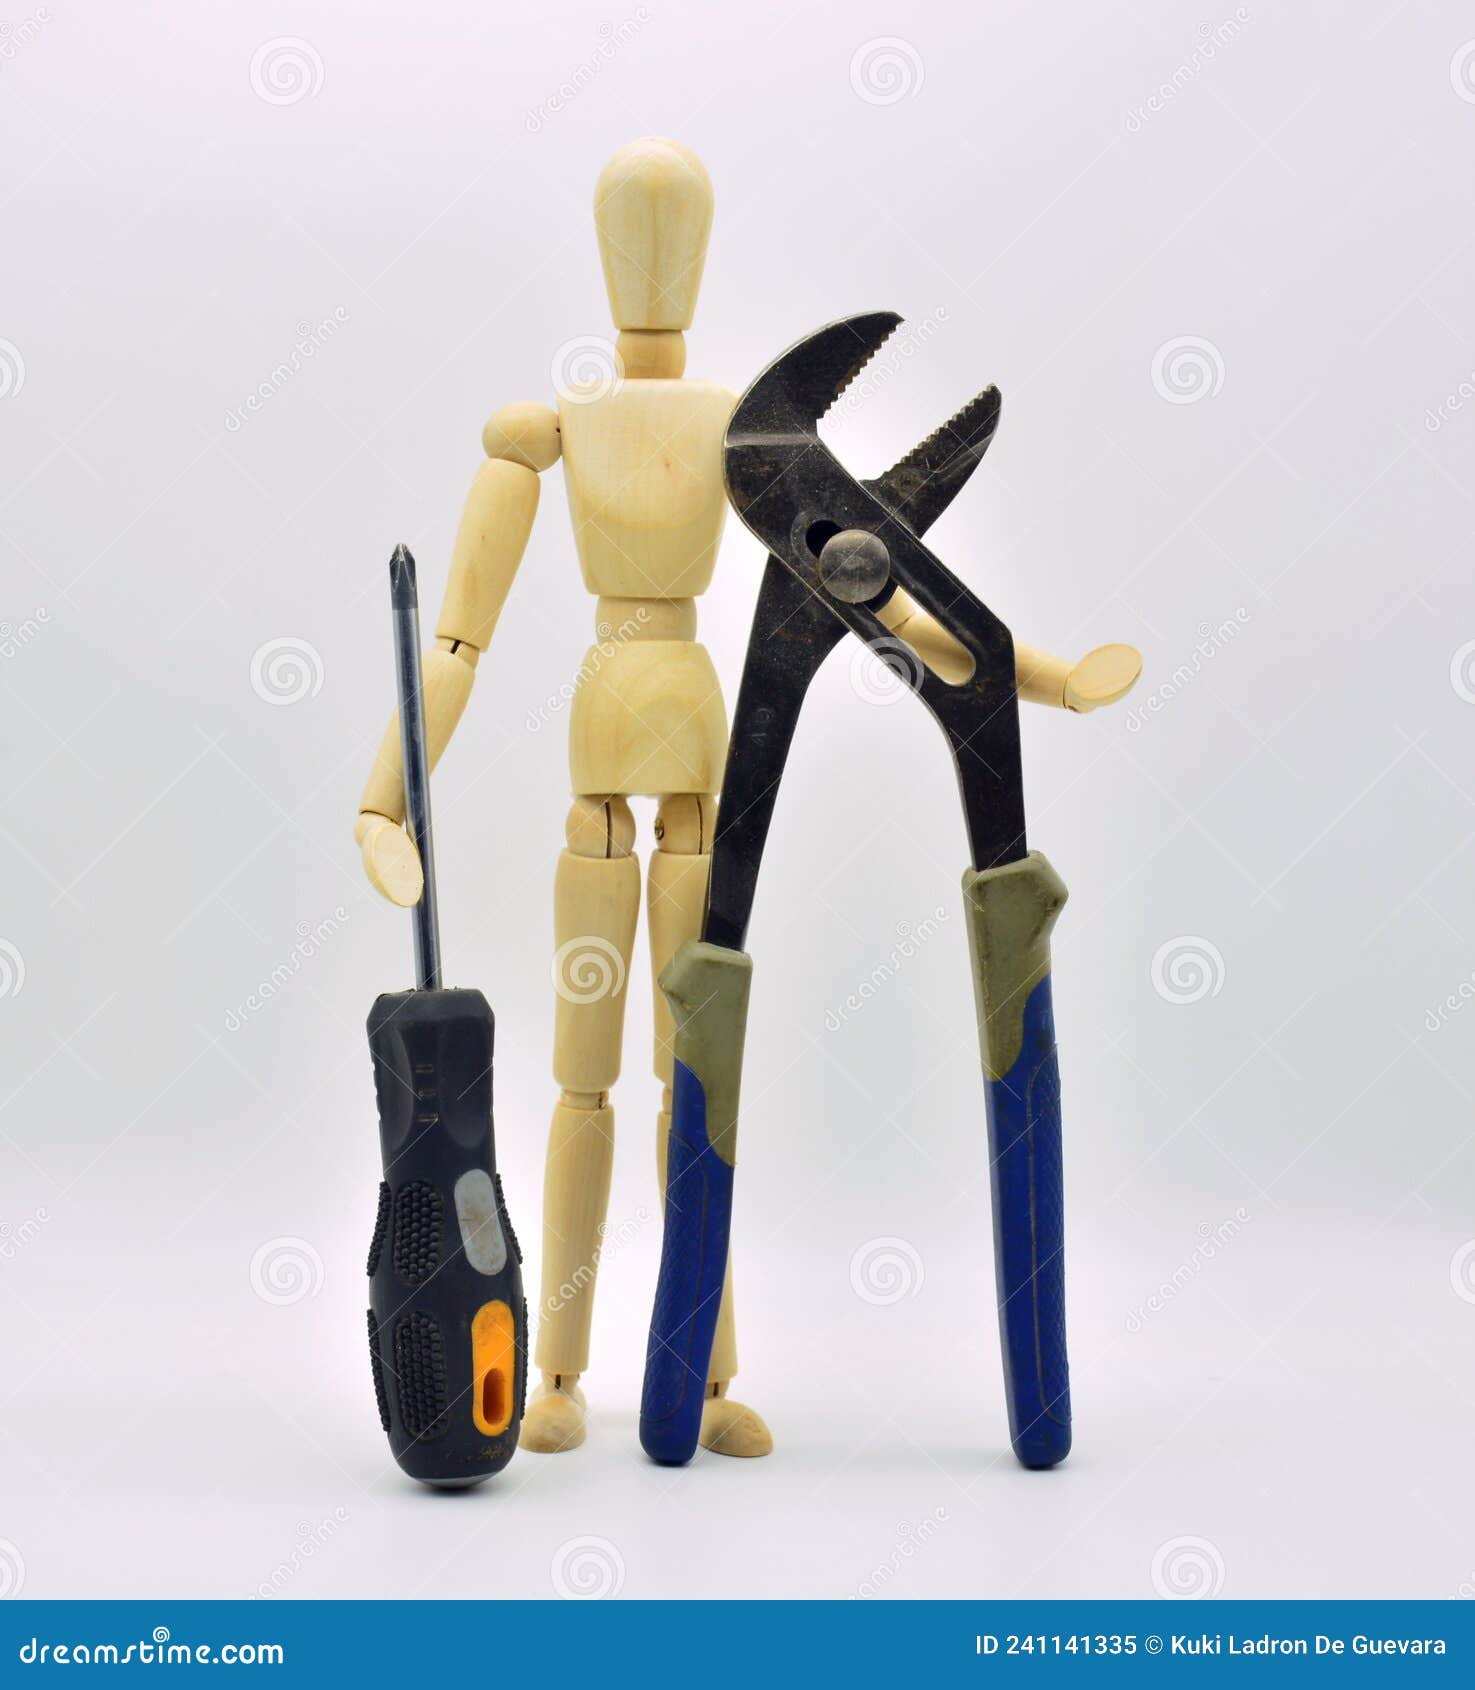 wooden articulated mannequin with work